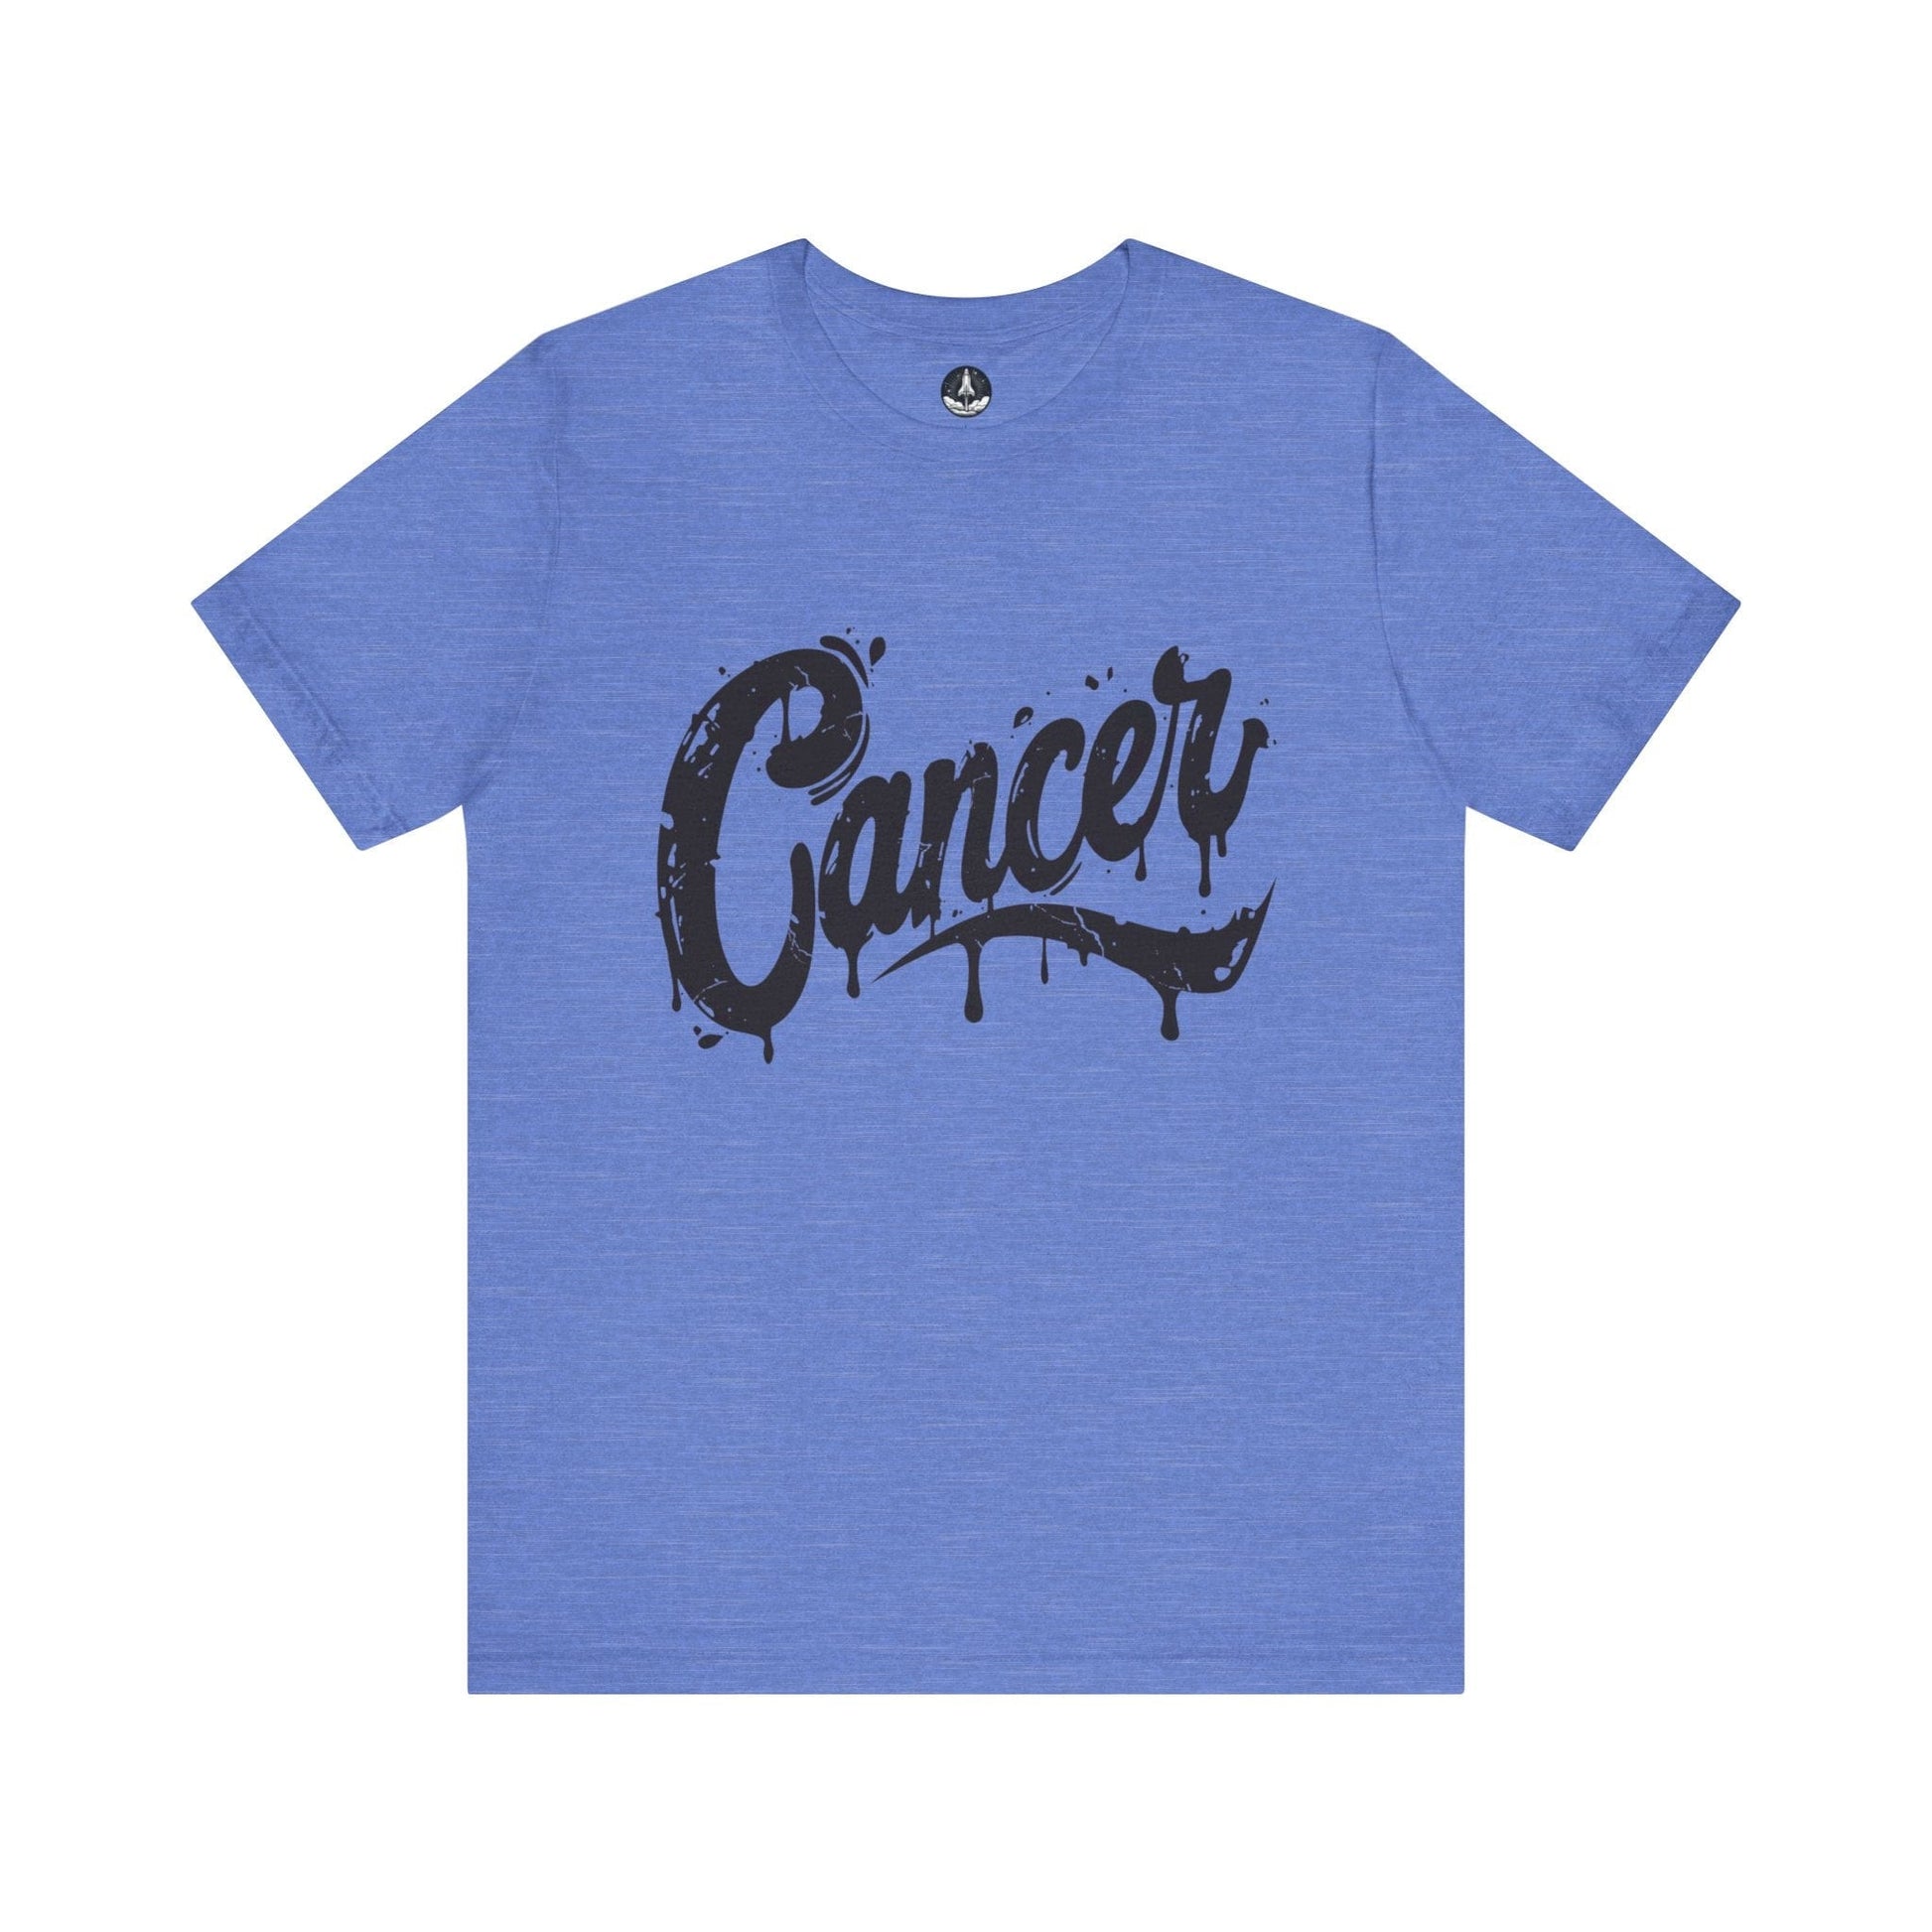 T-Shirt Heather Columbia Blue / S Tidal Emotion Cancer TShirt: Flow with Feeling